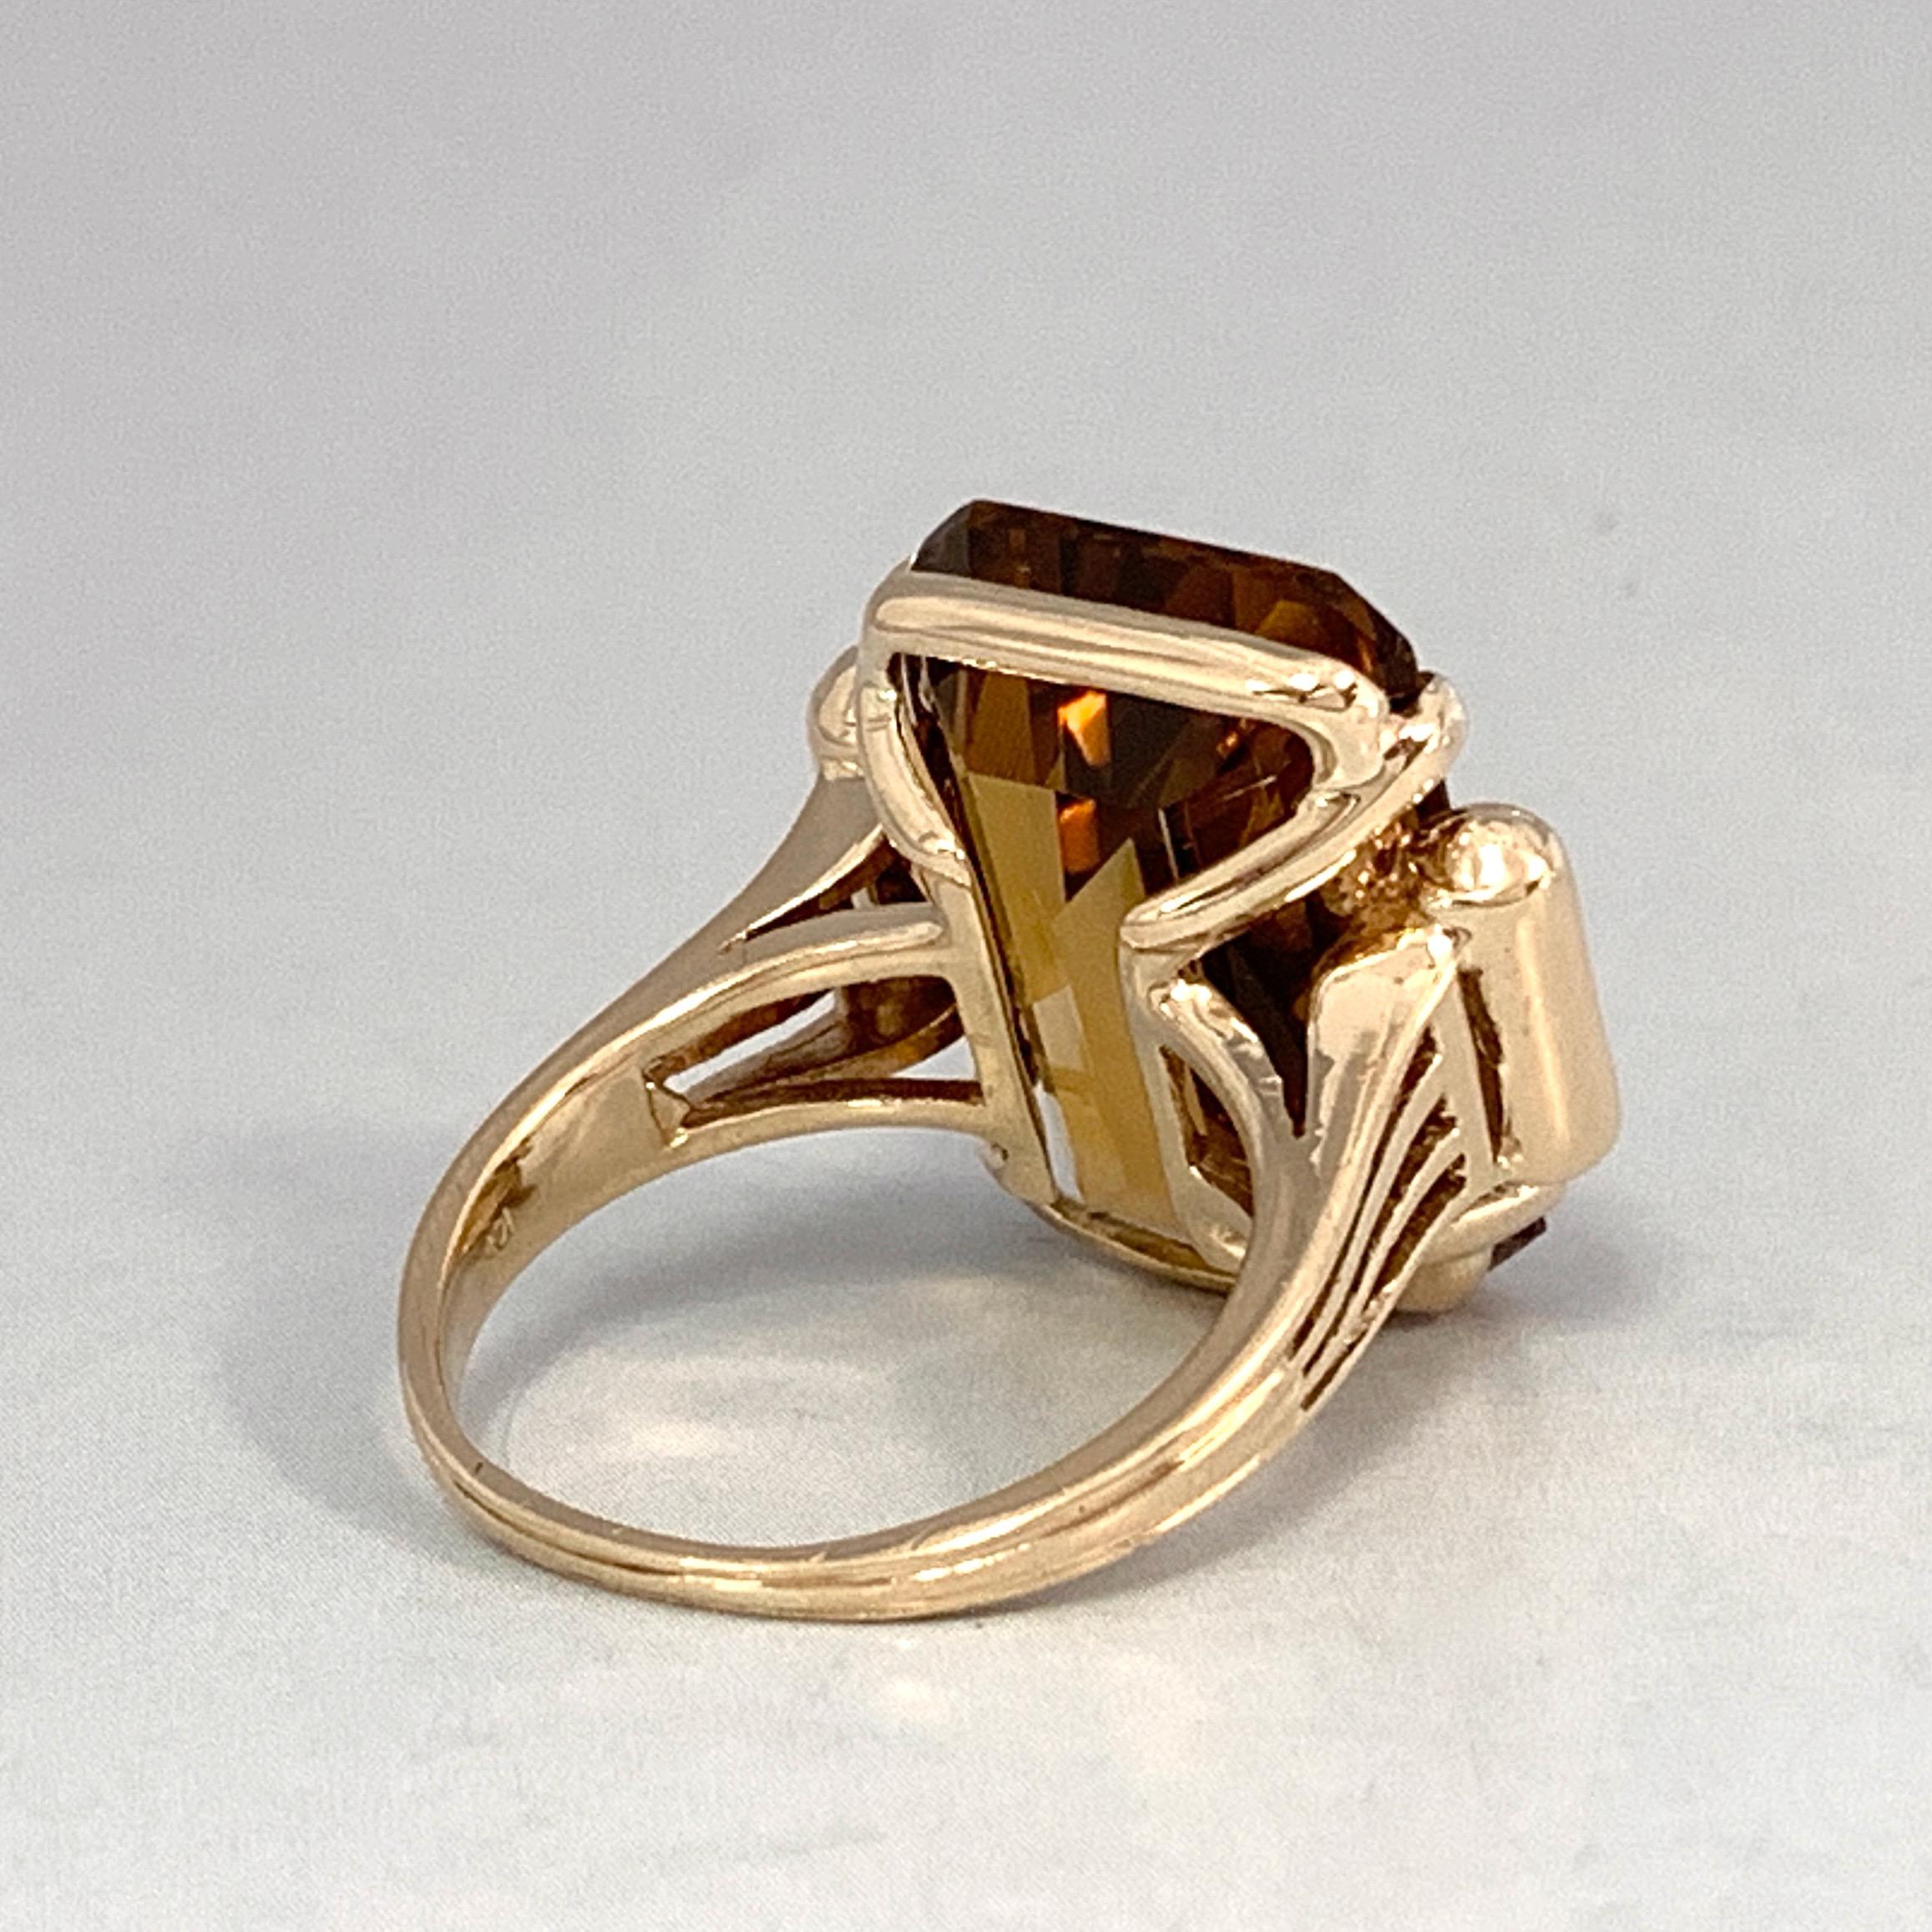 18 Carat Honey-Colored Smoky Quartz Cocktail Ring in Yellow Gold Circa 1970 1